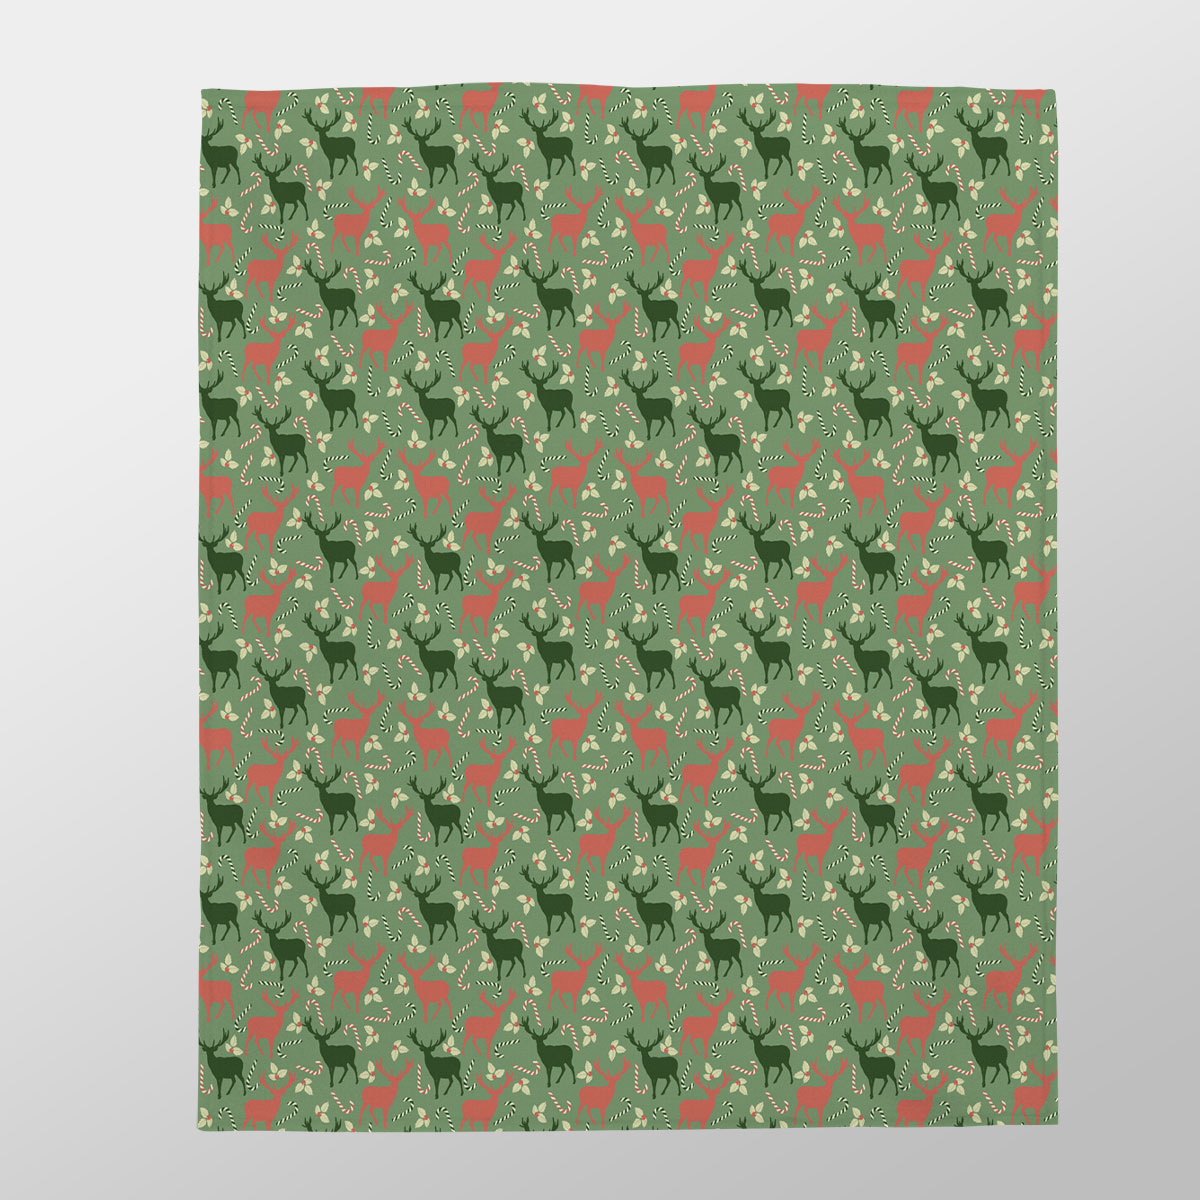 Reindeer, Christmas Flowers And Candy Canes Velveteen Plush Blanket